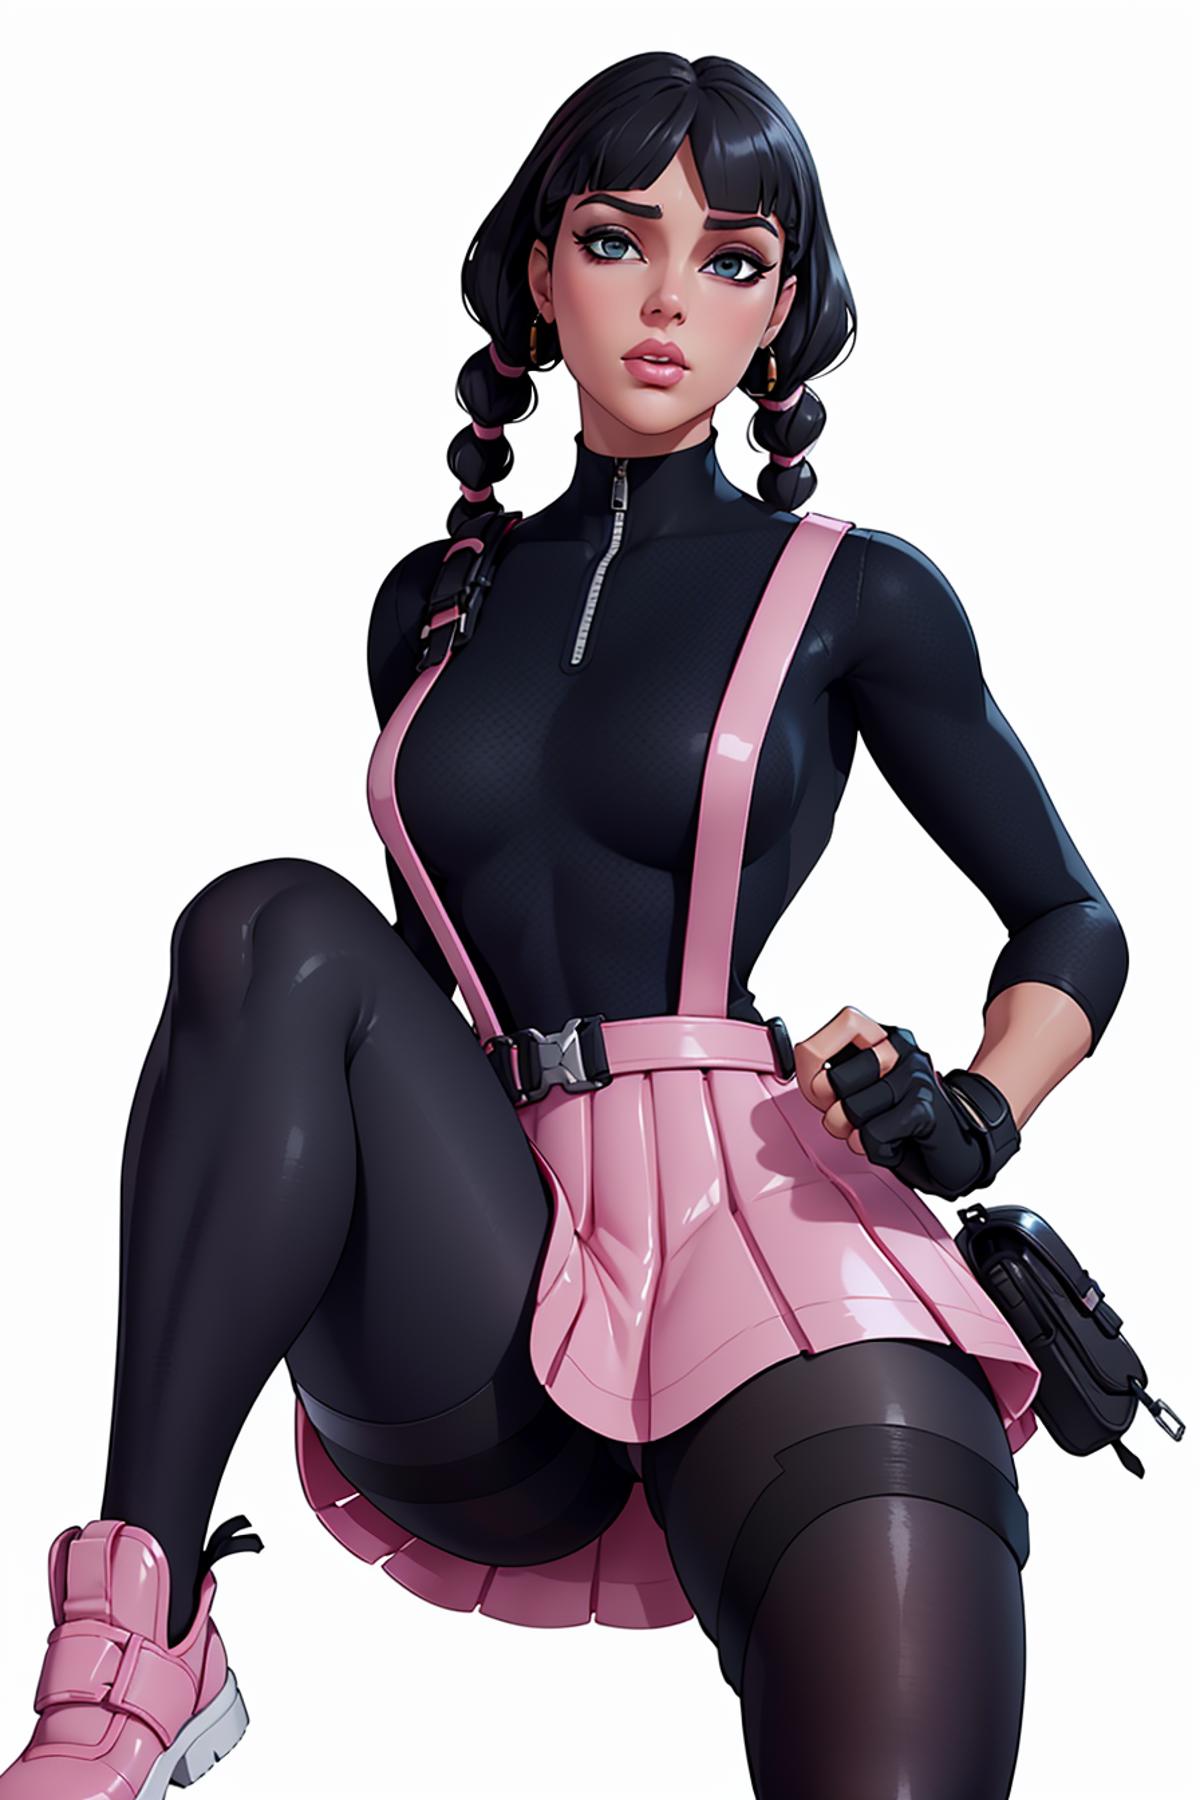 The image features a female character with black hair and pink accessories, wearing a black and pink outfit. She is posing in a unique manner, with one leg up and a gun in her hand. The overall scene appears to be a combination of anime and comic book art styles, showcasing the character's distinctive appearance and action-packed pose.